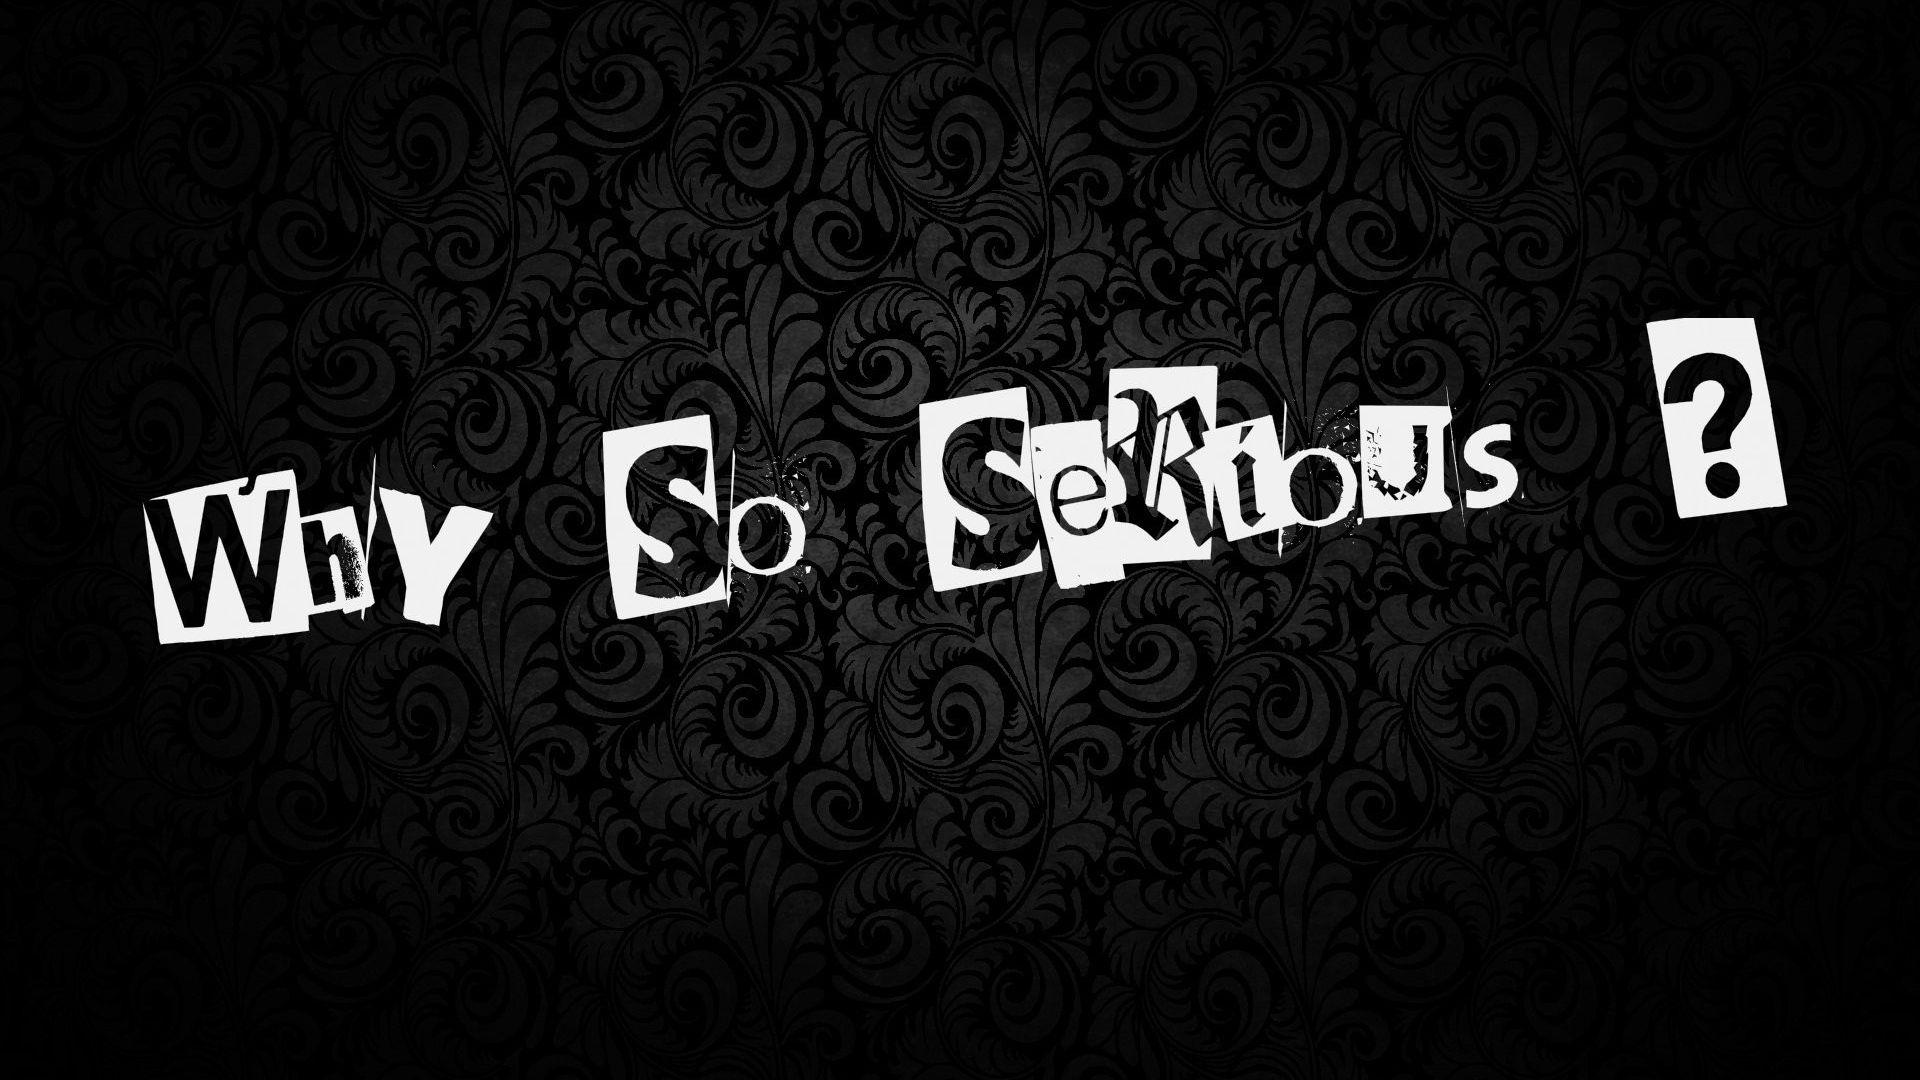 Download wallpapers 1920x1080 why so serious, inscription, backgrounds